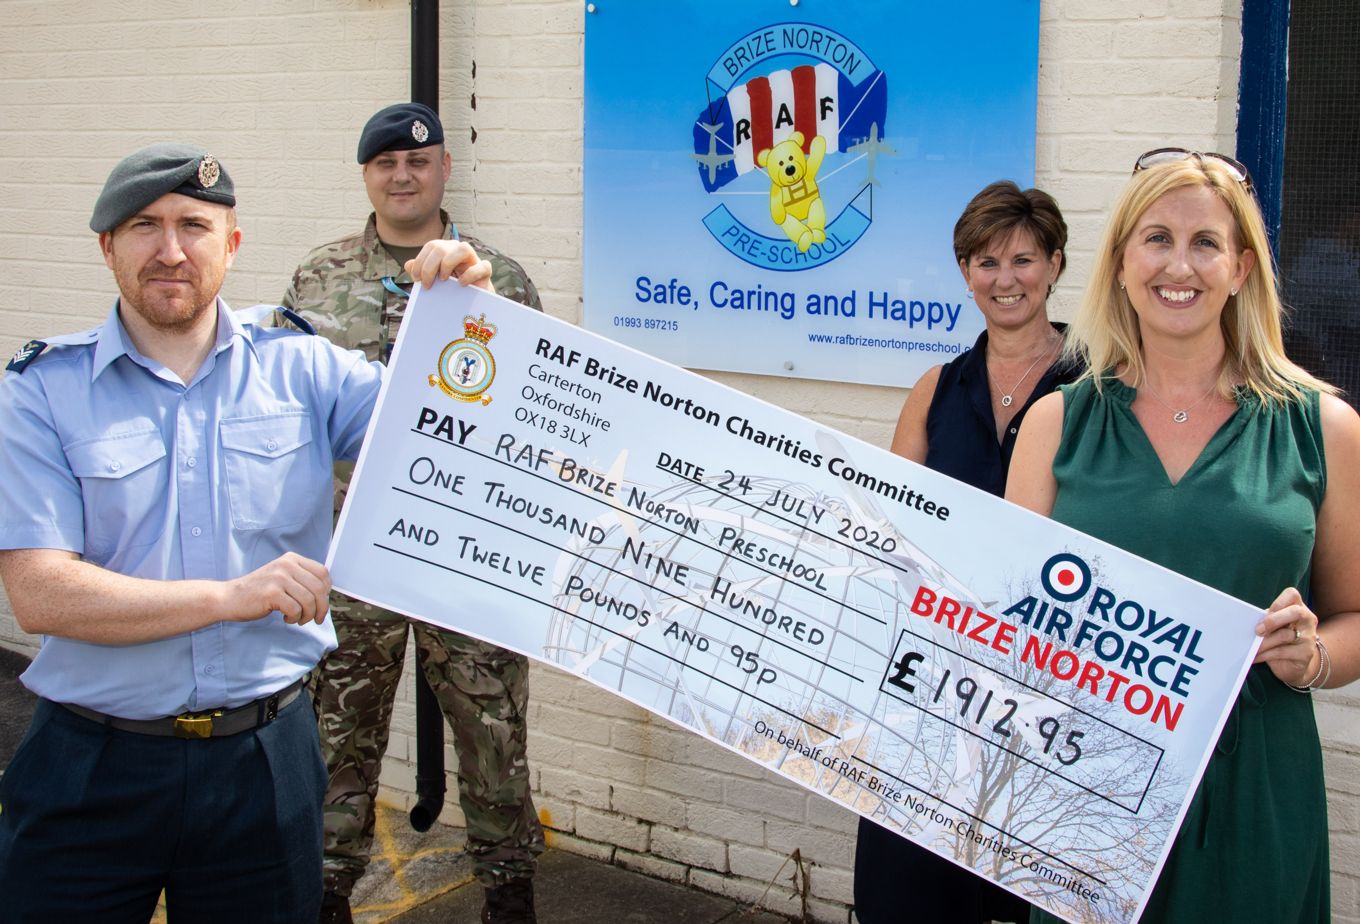 RAF Brize Norton Pre-School Accept Generous Donation of £1912.95 from the Station Charities Committee